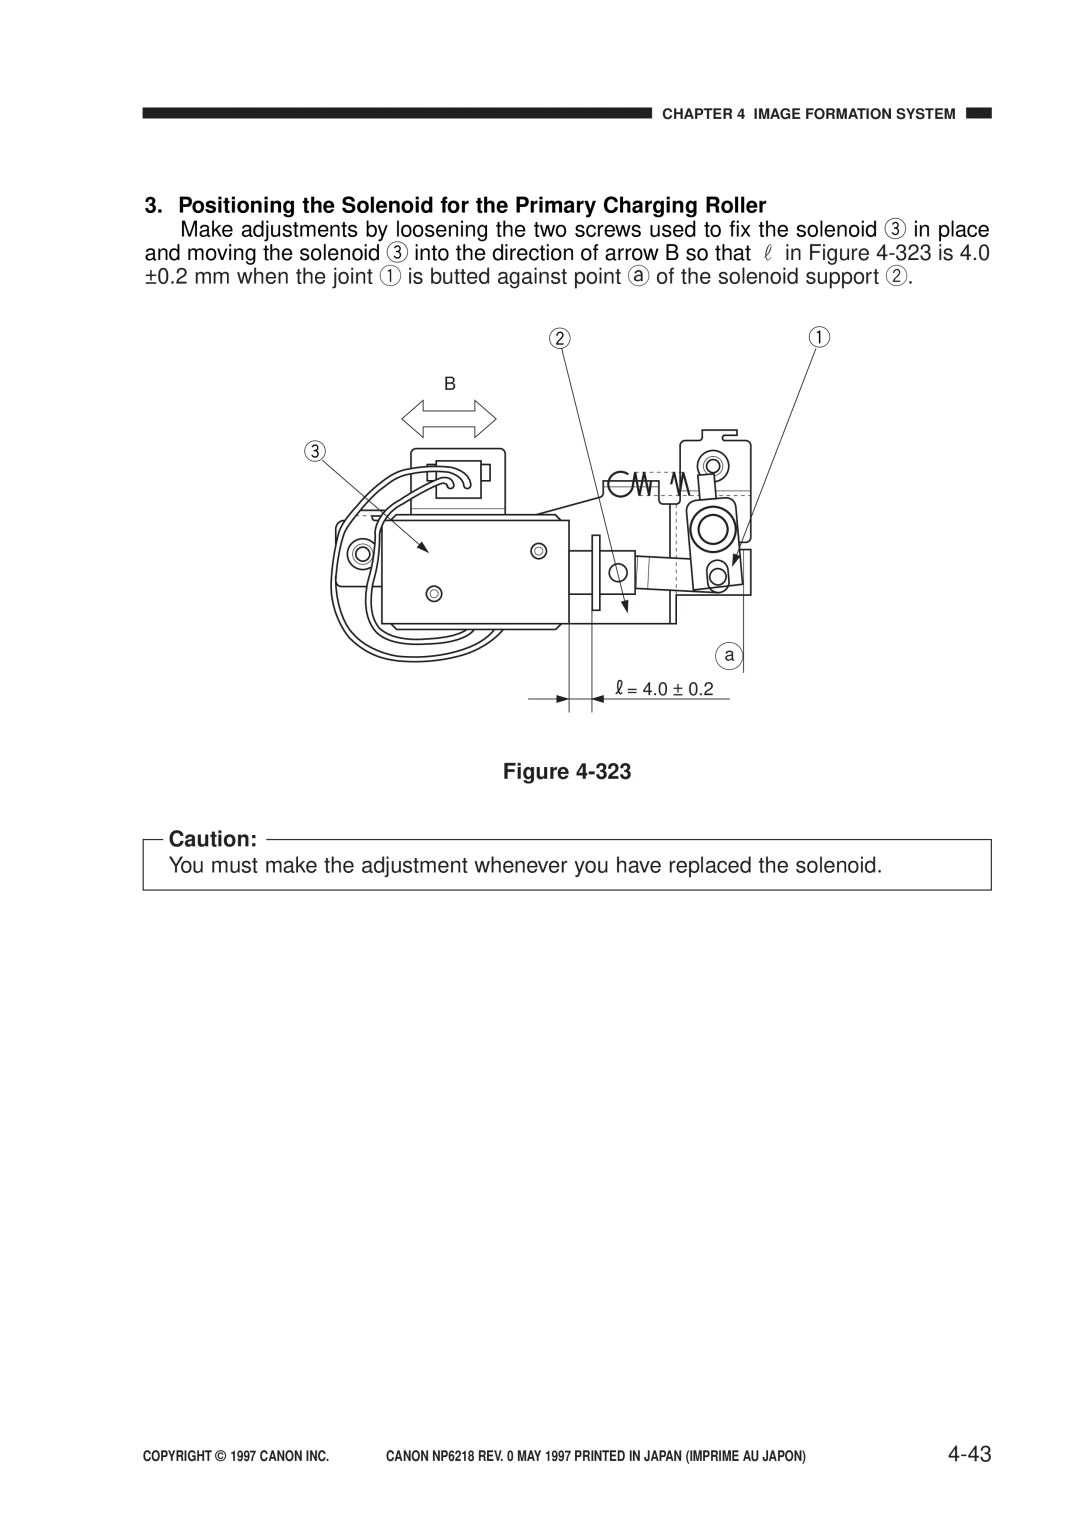 Canon FY8-13EX-000, NP6218 service manual Positioning the Solenoid for the Primary Charging Roller, 4-43 